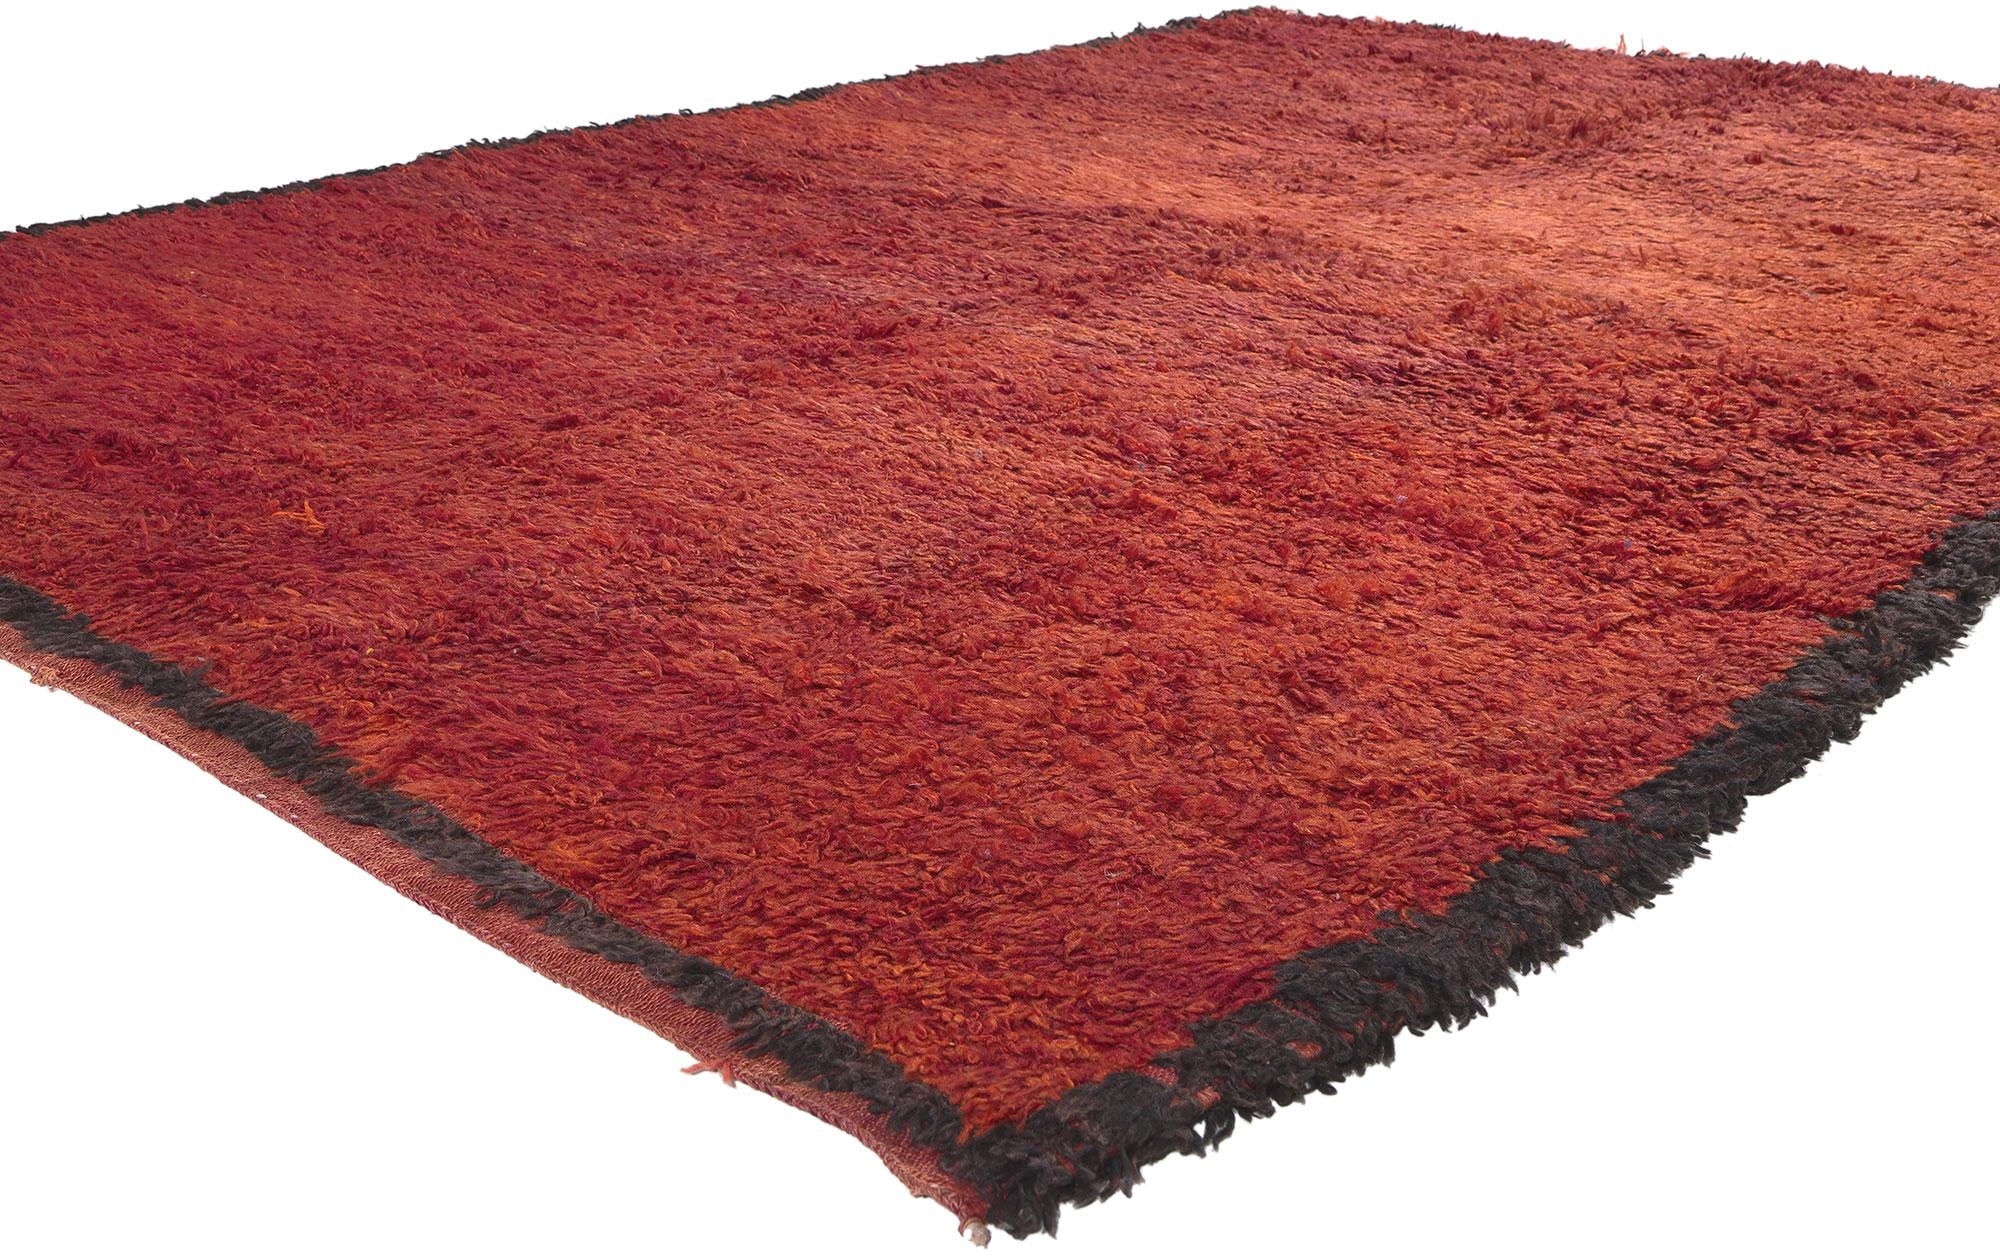 20961 Vintage Red Beni Mrirt Moroccan Rug, 06'06 x 09'11. Witness the captivating allure of this vintage Beni Mrirt Moroccan rug, a masterful creation from the Mrirt region in the Middle Atlas Mountains, meticulously crafted by the skilled artisans